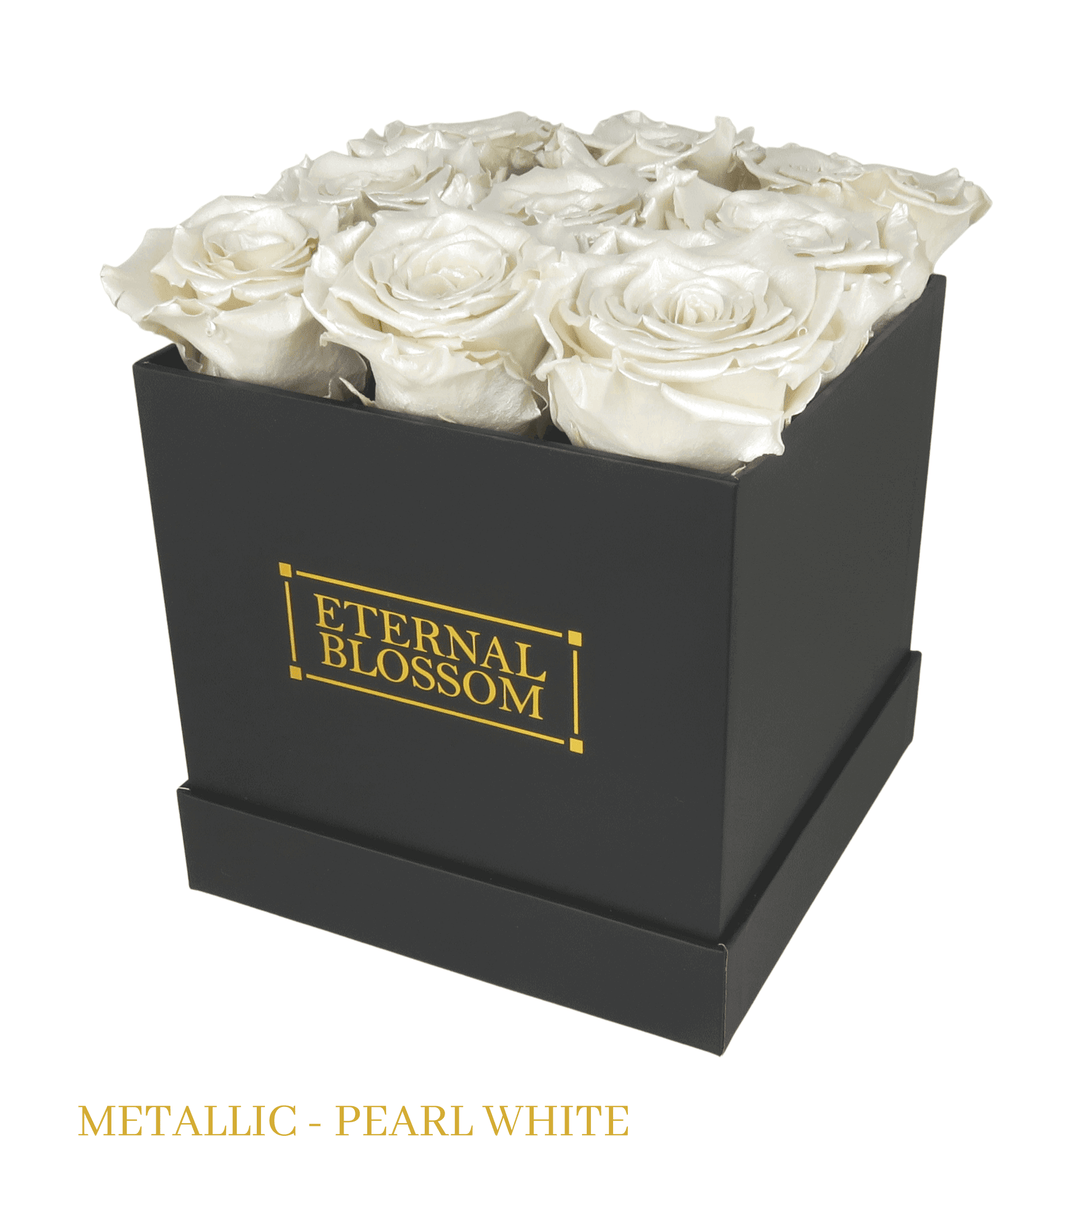 9 Piece Blossom Box - Black Box - All Colours of Year Lasting Infinity Roses